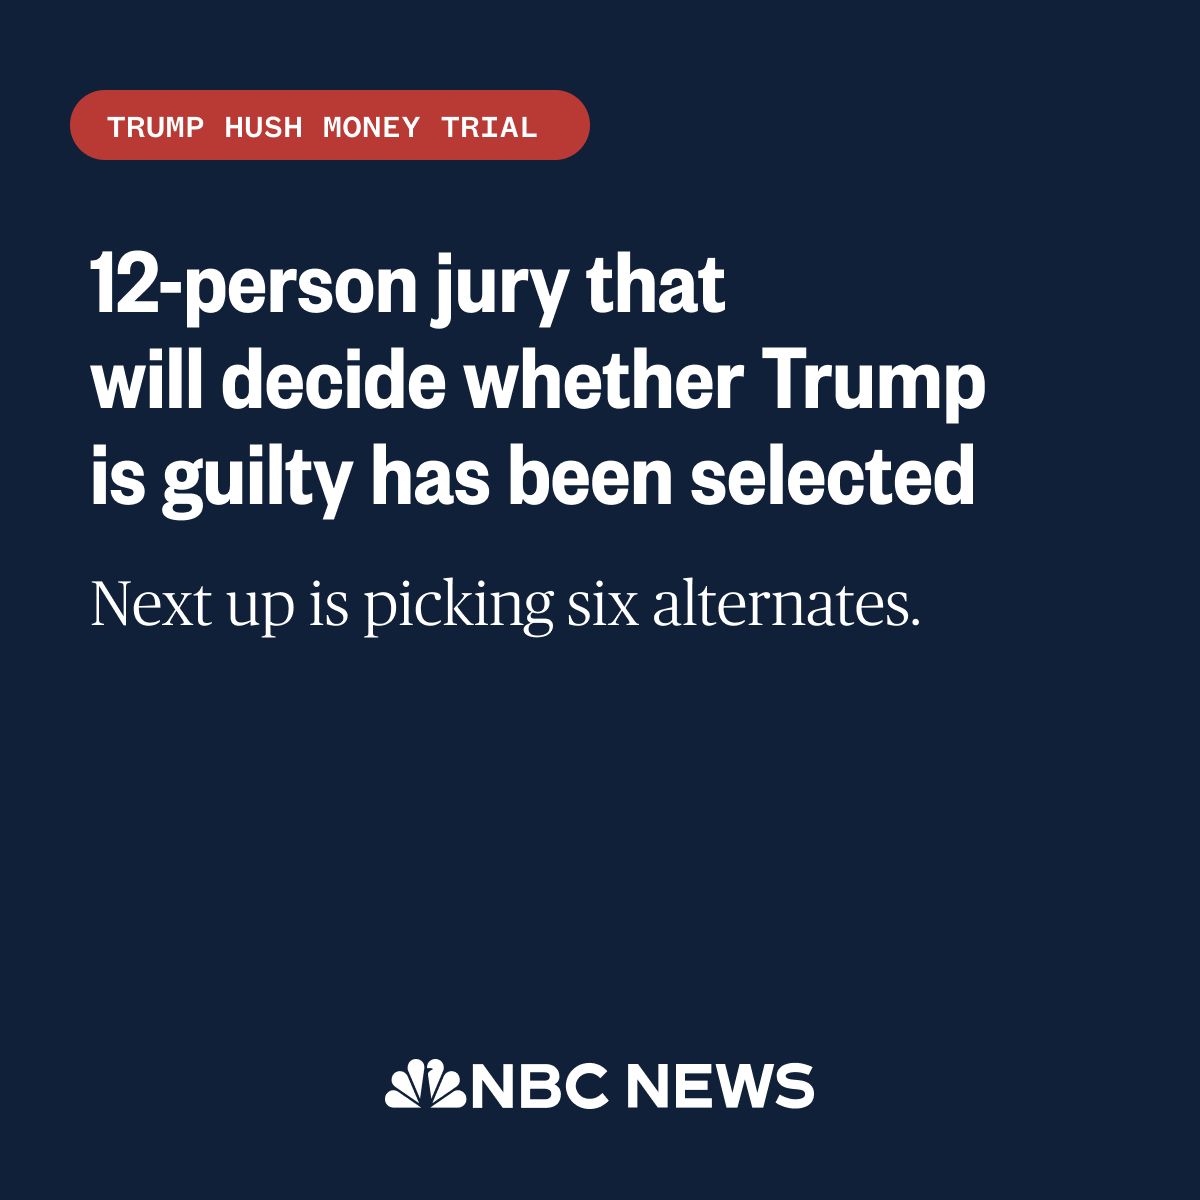 The 12-person jury in former President Trump's hush money trial has been selected. Six more jurors be selected to serve as alternates